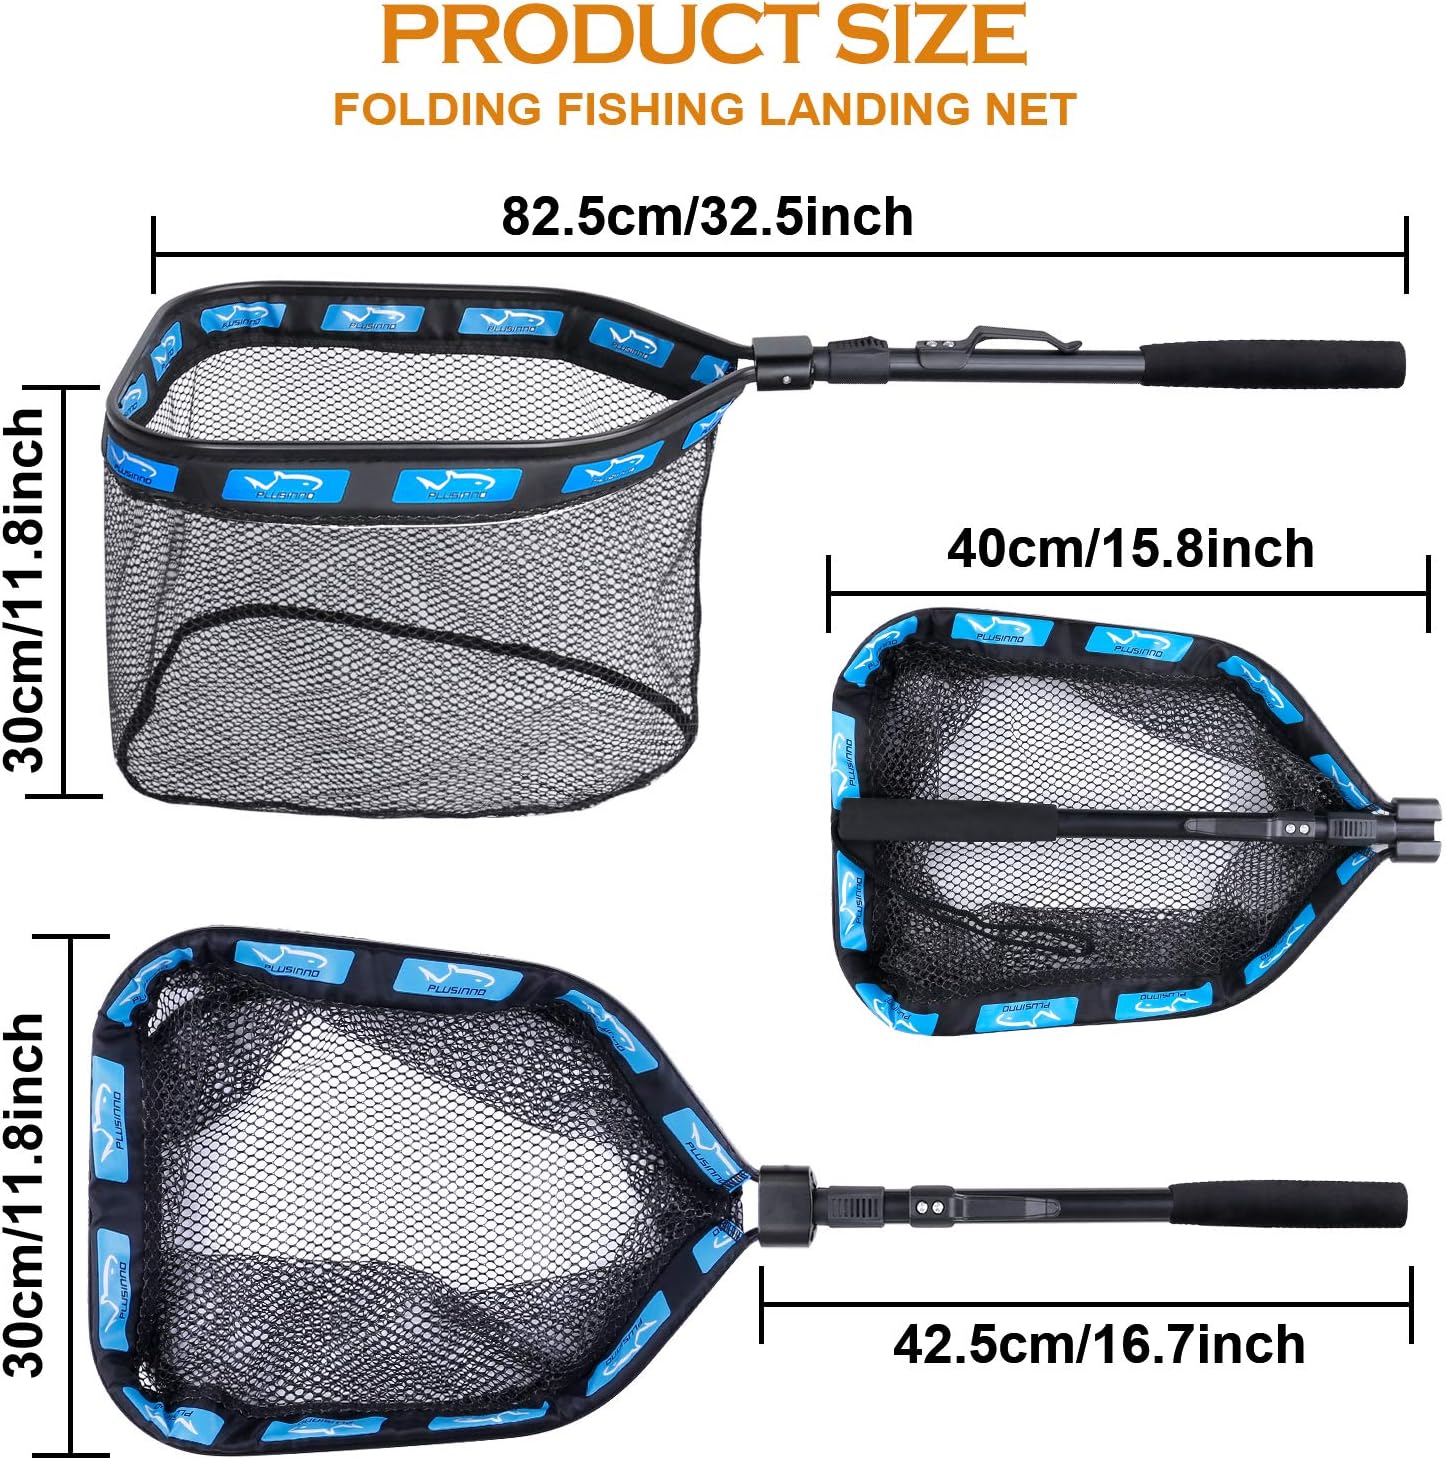 PLUSINNO Floating Fishing Net for Steelhead, Salmon, Fly, Kayak, Catfish, Bass, Trout Fishing, Rubber Coated Landing Net for Easy Catch  Release, Compact  Foldable for Easy Transportation  Storage-VB